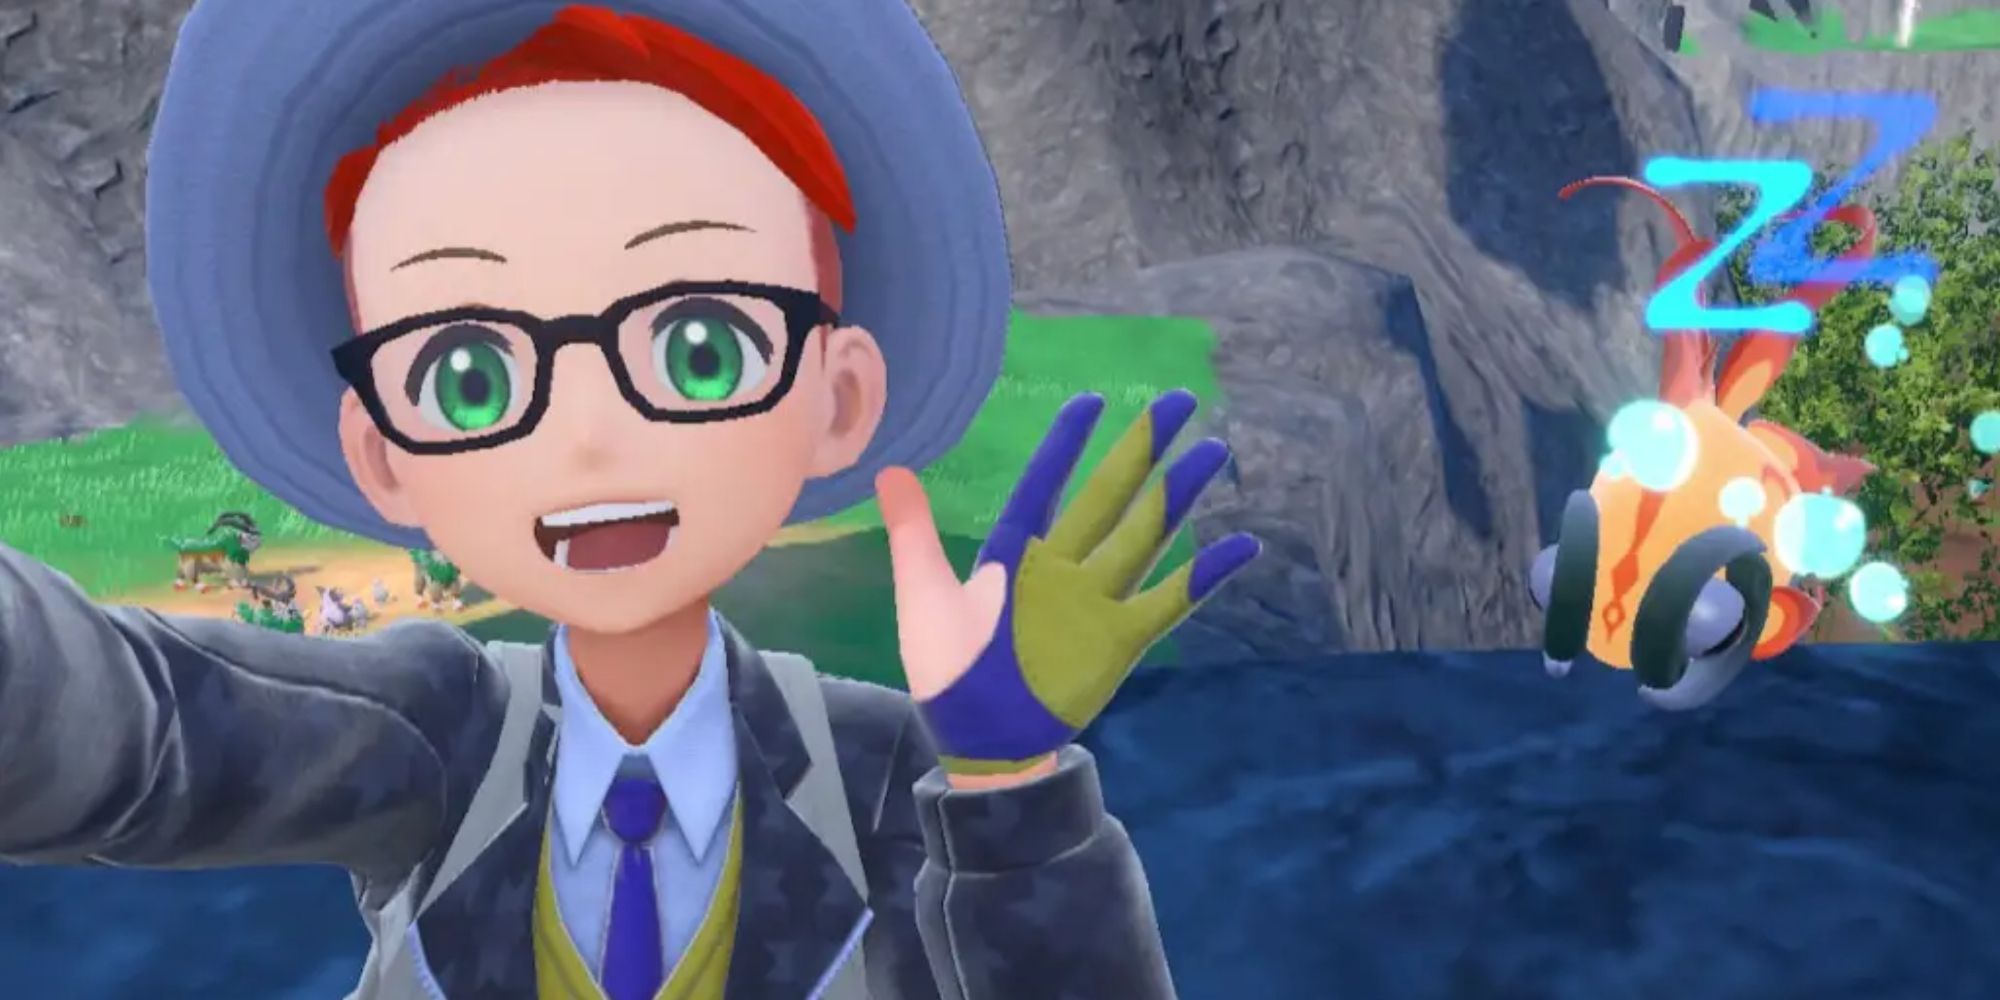 Pokemon protagonist holding up camera and snapping a selfie with Chi-Yu